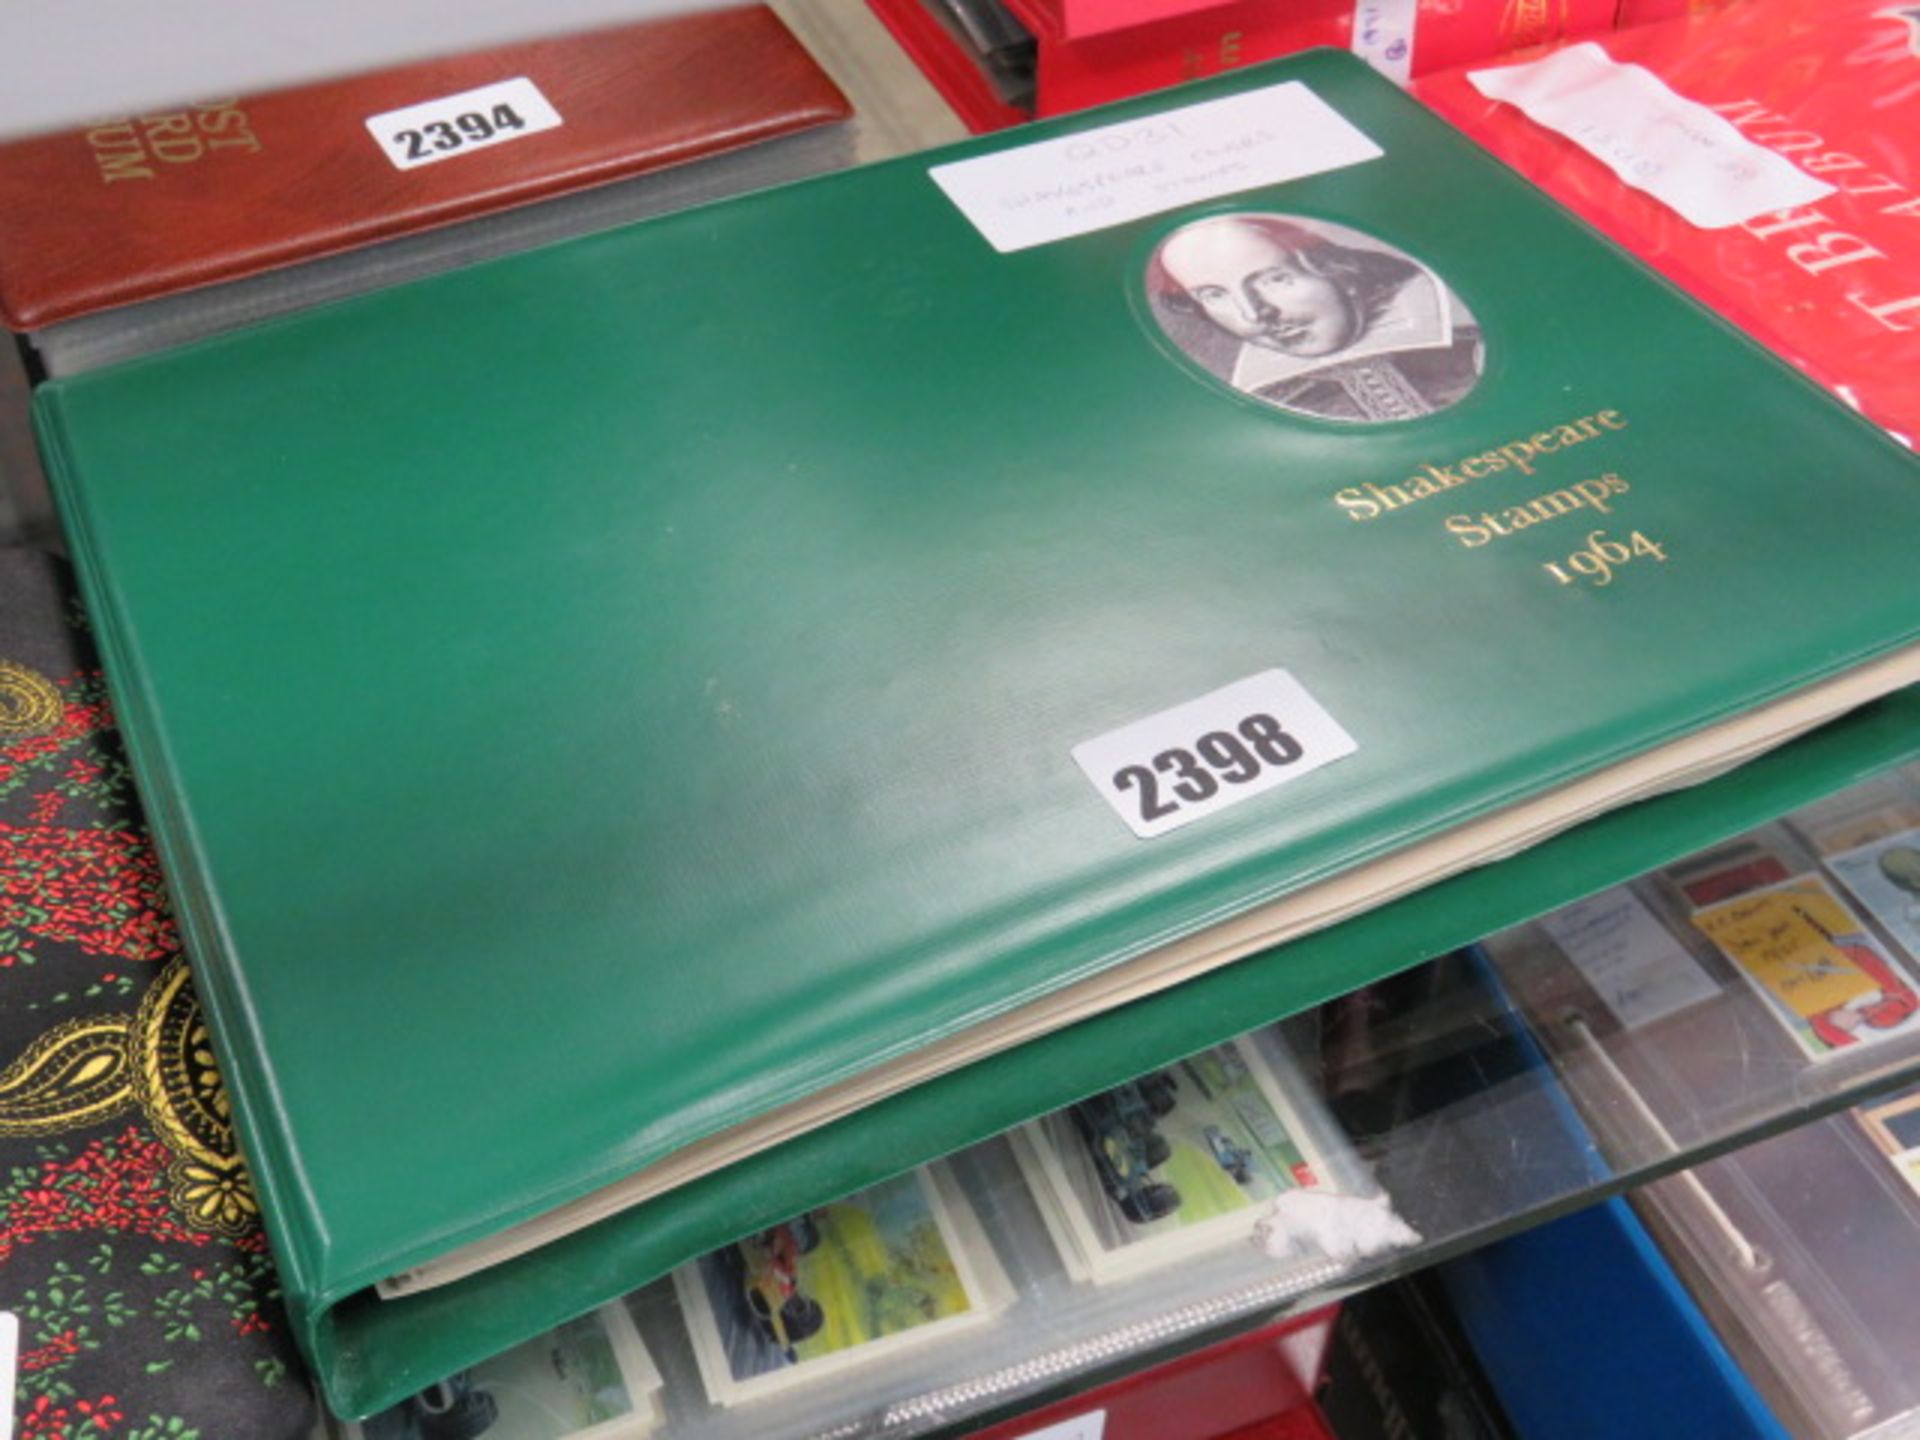 Shakespeare covers and stamps in green binder